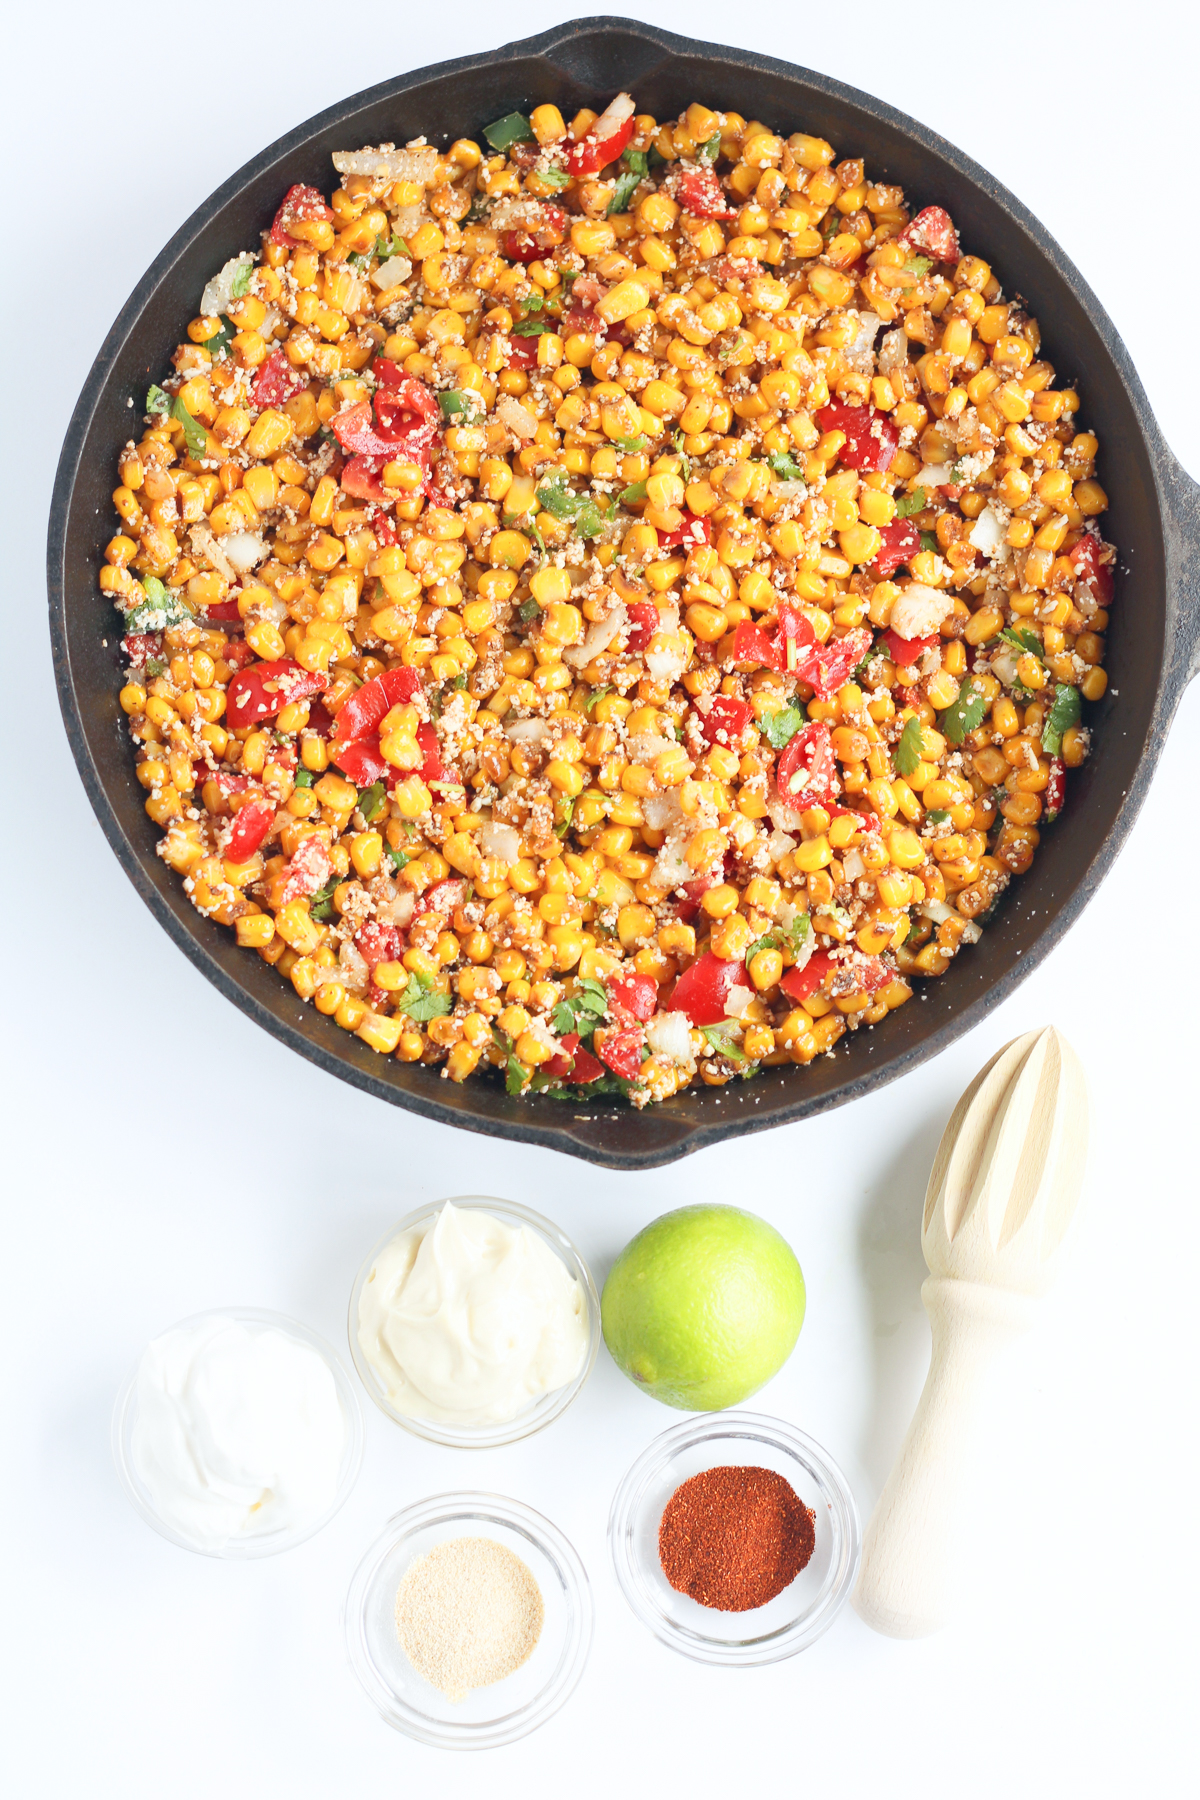 Corn with tomatoes and other vegetables in a skillet with ingredients for the sauce nearby on the table from overhead.